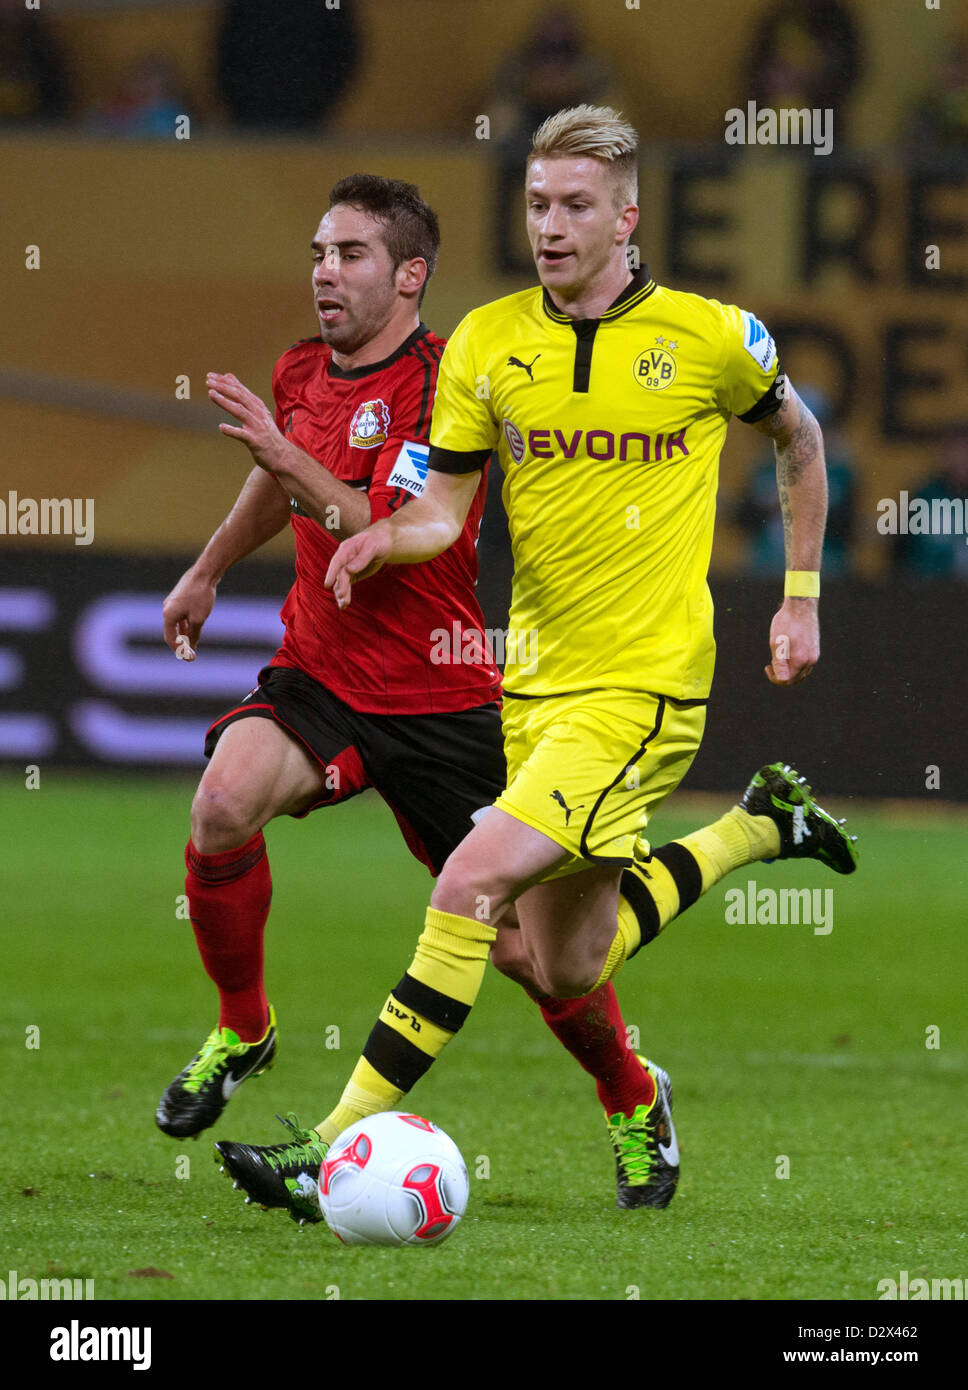 Dortmund's Marco Reus (R) vies for the ball with Leverkusen's Daniel Carvajal (L) during the German Bundesliga soccer match between Bayer Leverkusen and Borussia Dortmund at BayArena in Leverkusen, Germany, 03 February 2013. Photo: BERND THISSEN (ATTENTION: EMBARGO CONDITIONS! The DFL permits the further utilisation of up to 15 pictures only (no sequential pictures or video-similar series of pictures allowed) via the internet and online media during the match (including halftime), taken from inside the stadium and/or prior to the start of the match. The DFL permits the unrestricted transmissio Stock Photo